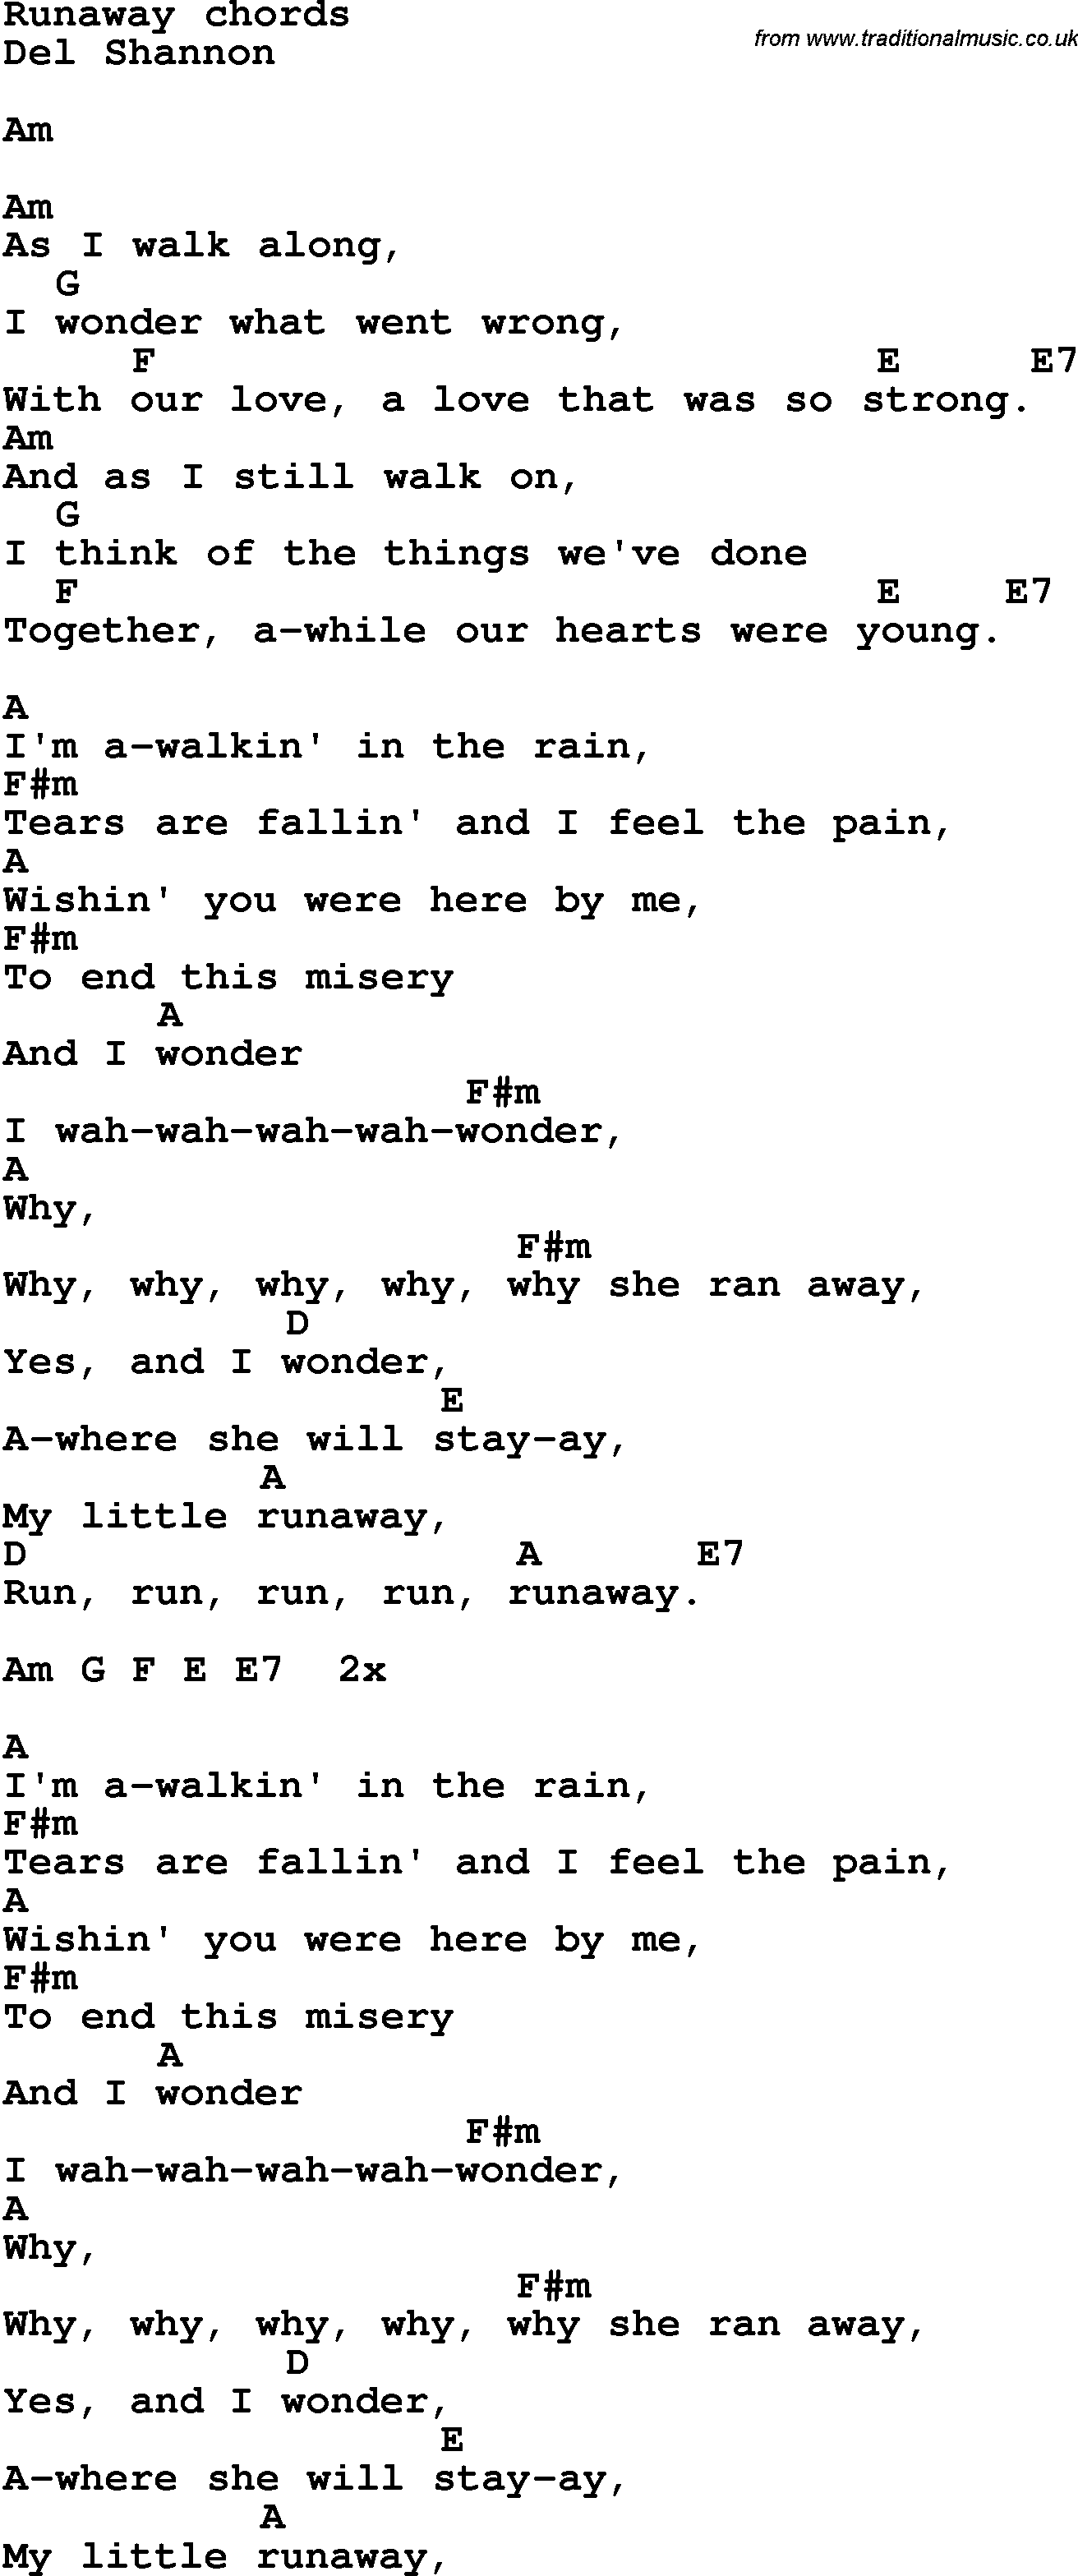 Song Lyrics with guitar chords for Runaway